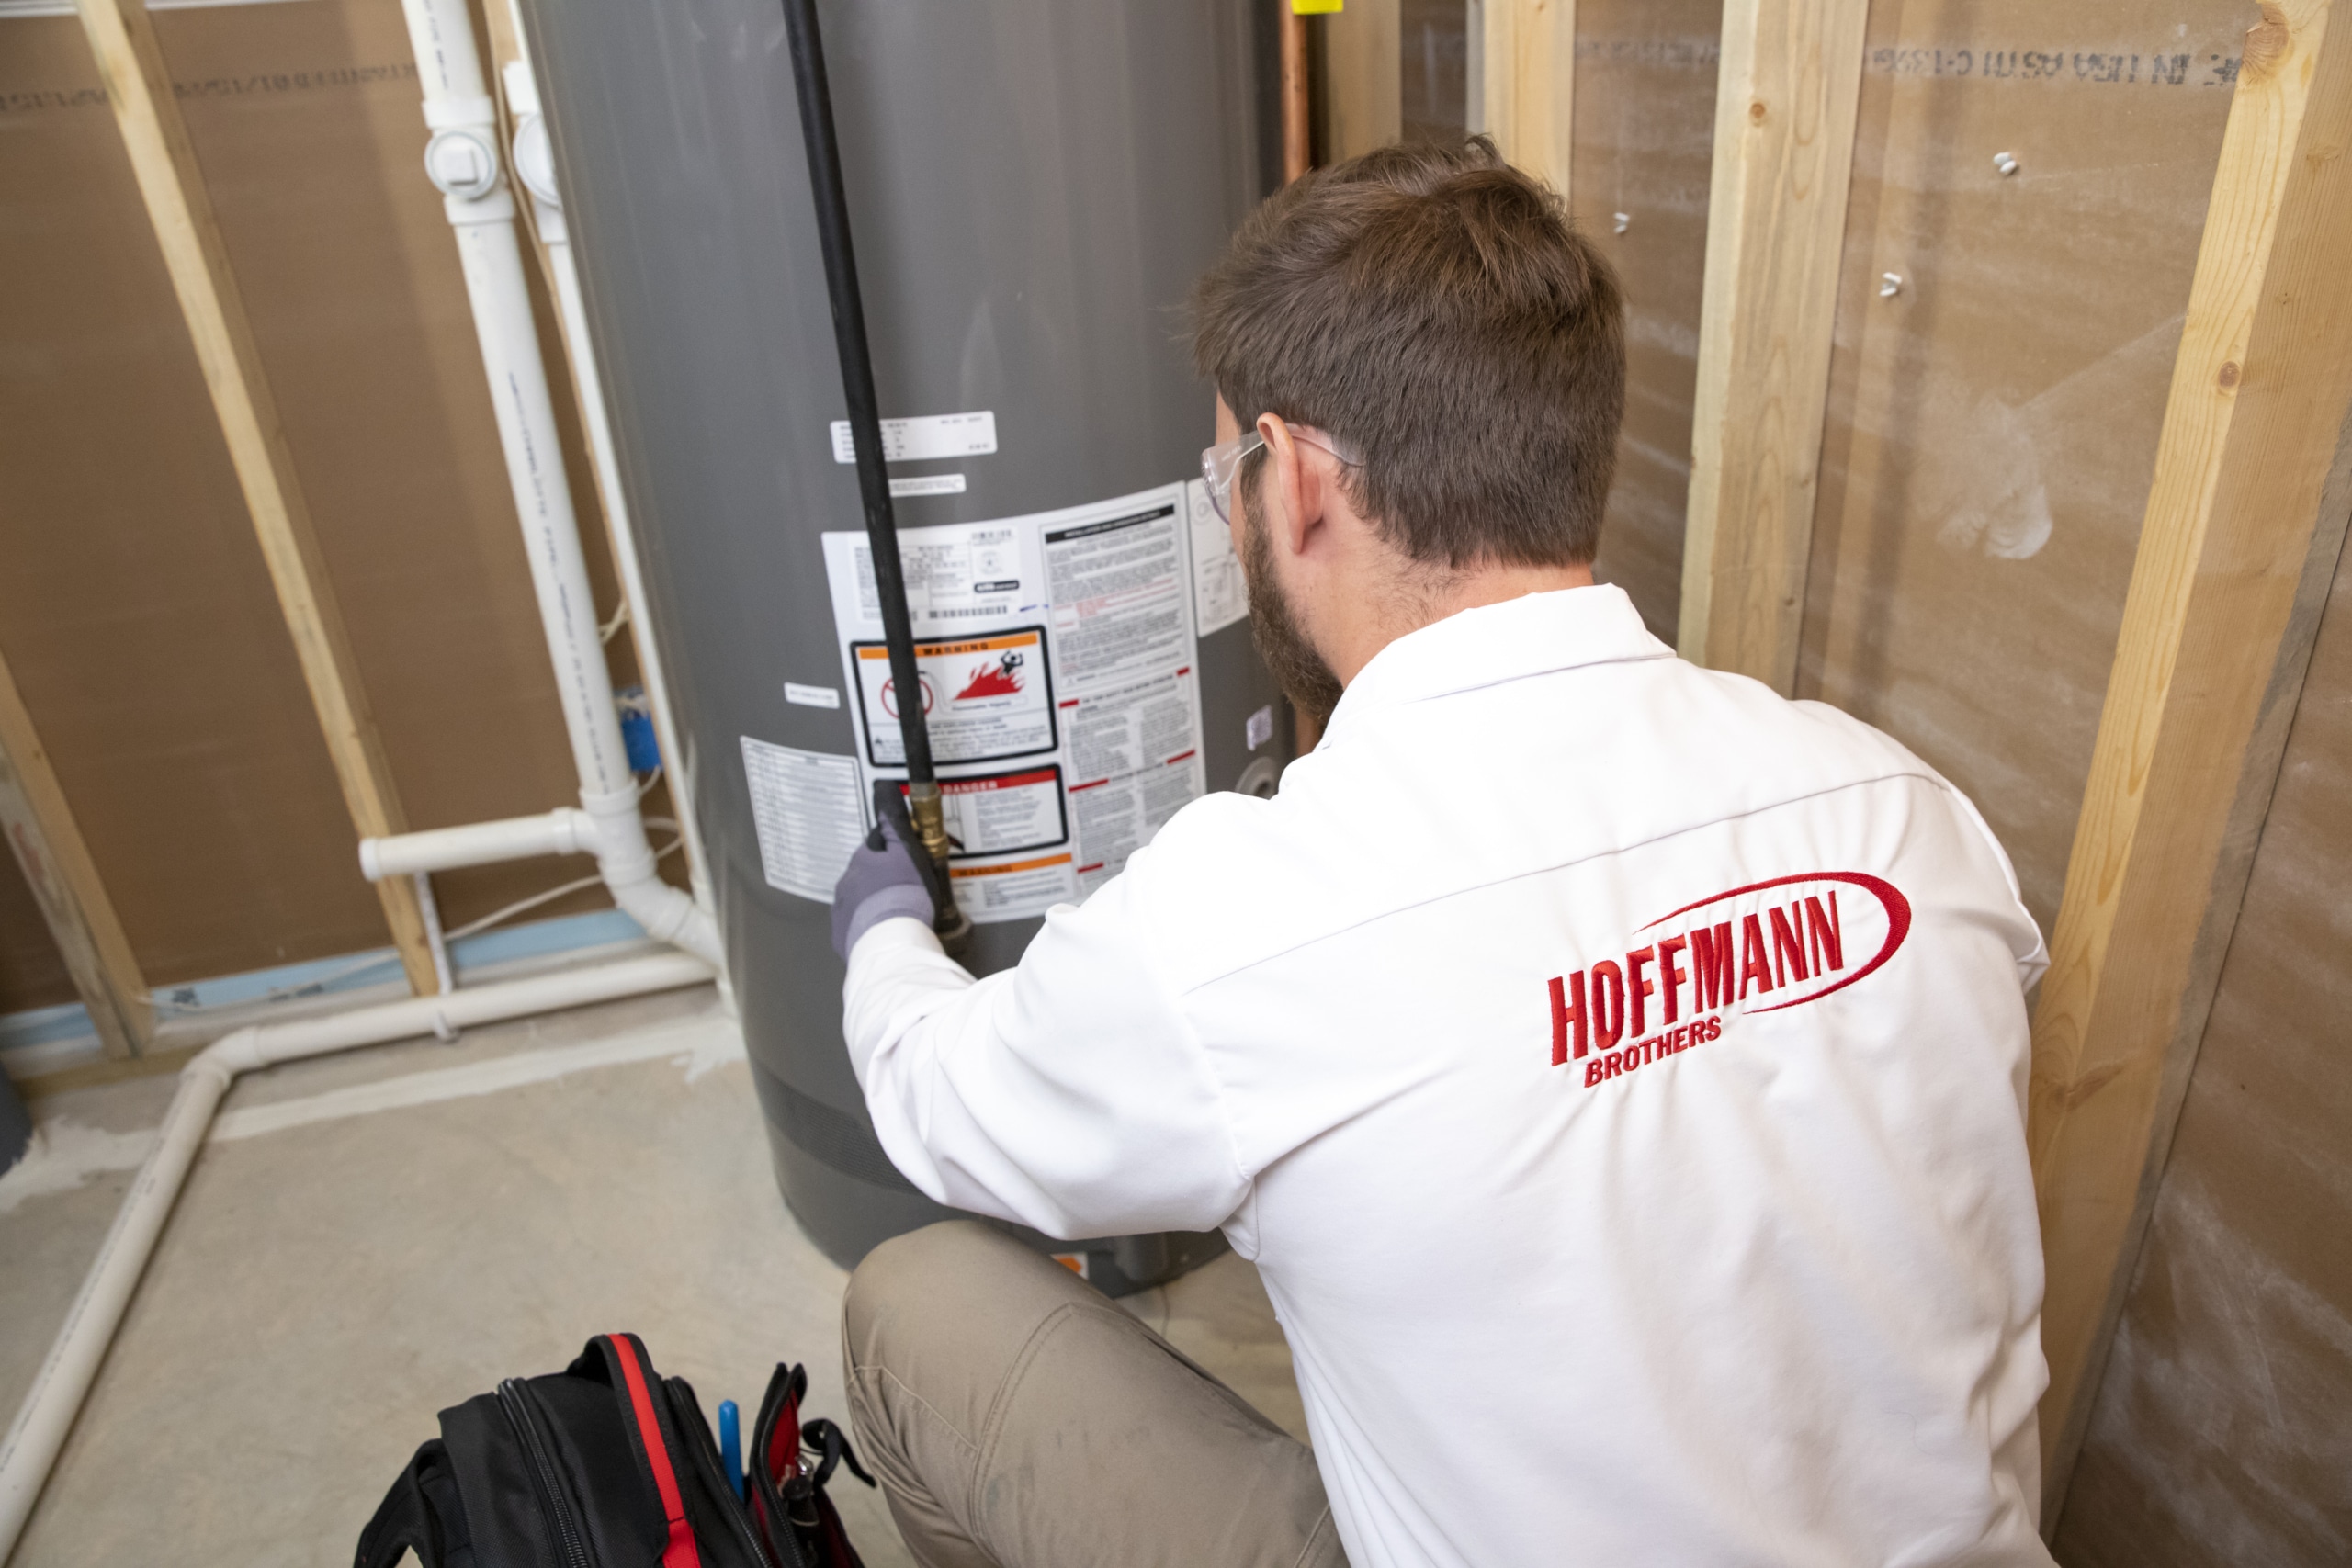 Professional Water Heater Services in St Louis By Hoffmann Brothers